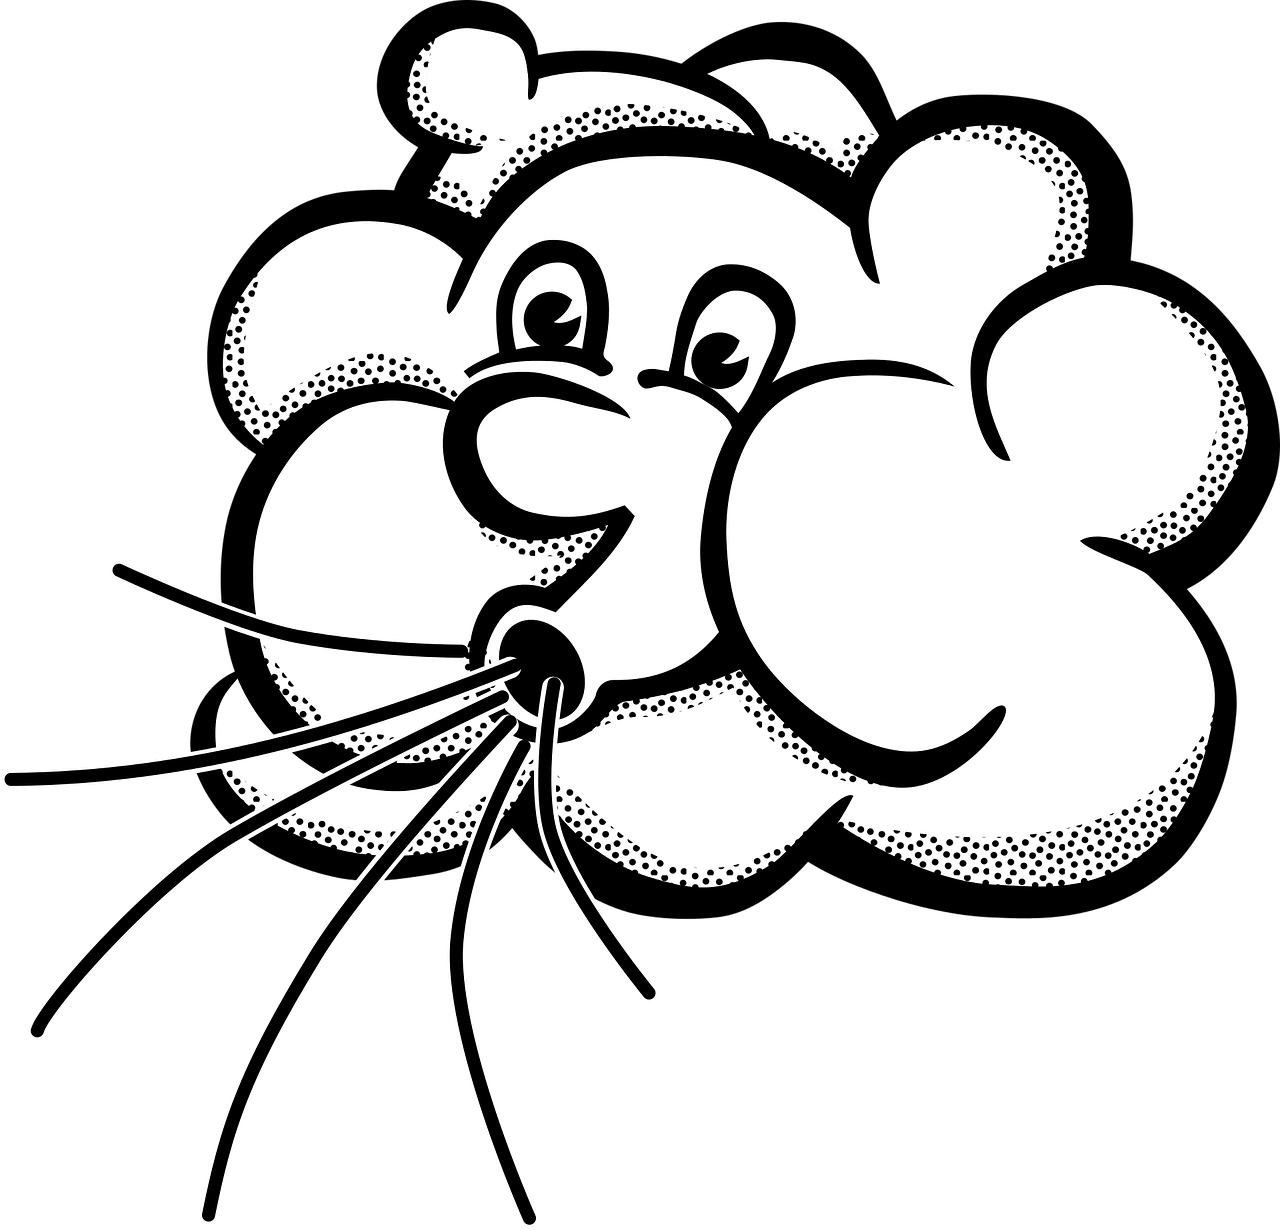 Wind clip art png. Windy clipart number 6